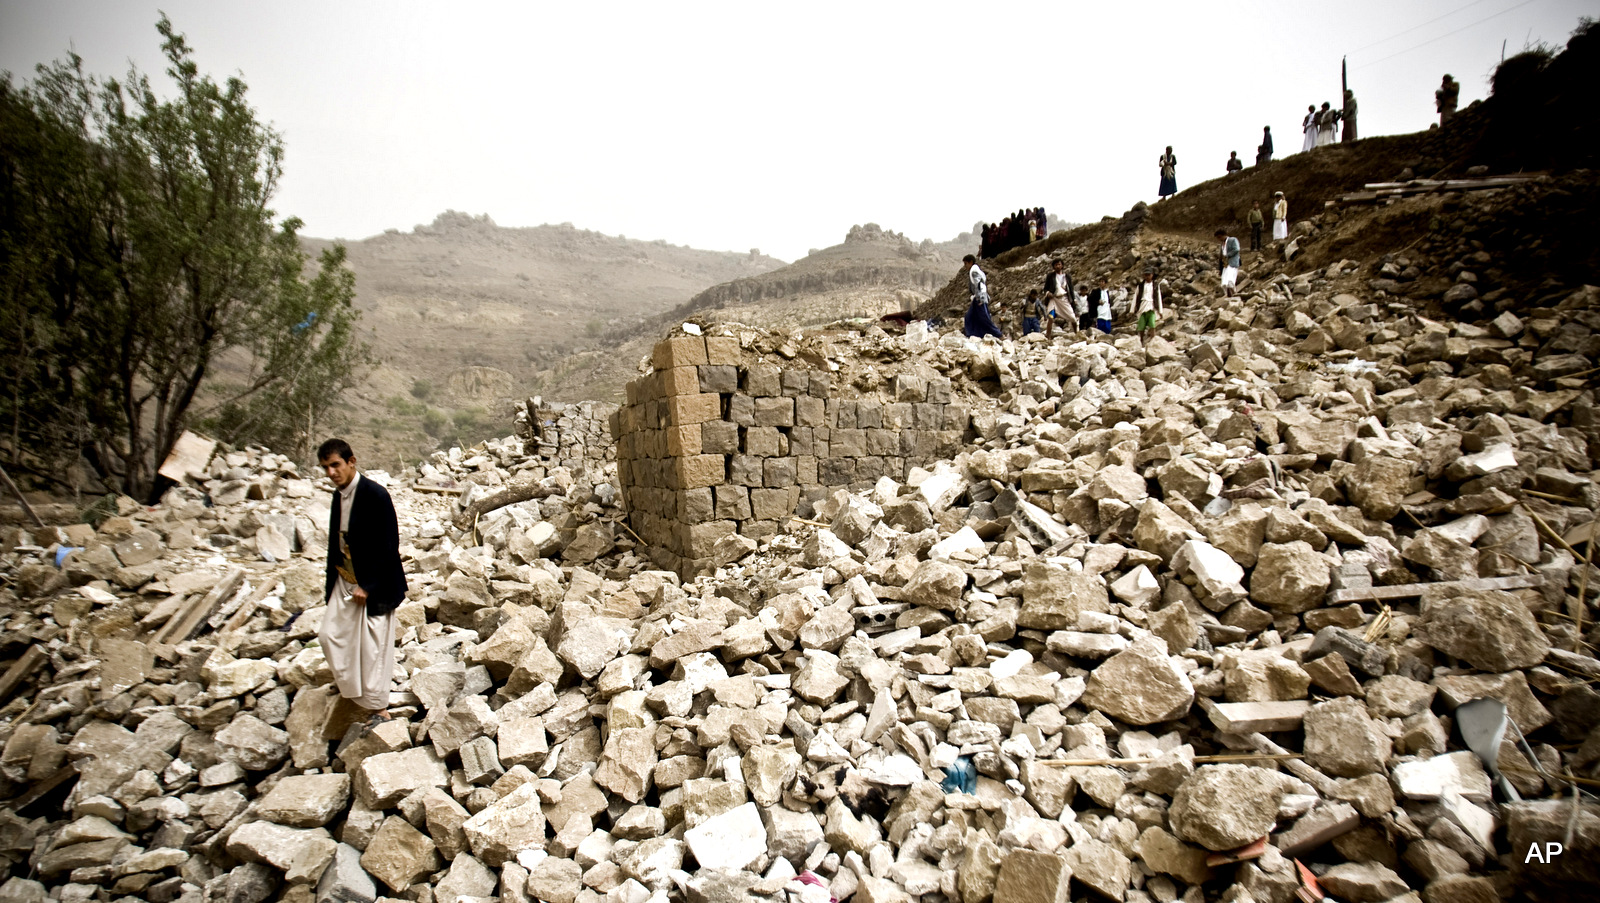 Yemenis search for survivors in the rubble of houses destroyed by Saudi-led airstrikes in a village near Sanaa, Yemen.